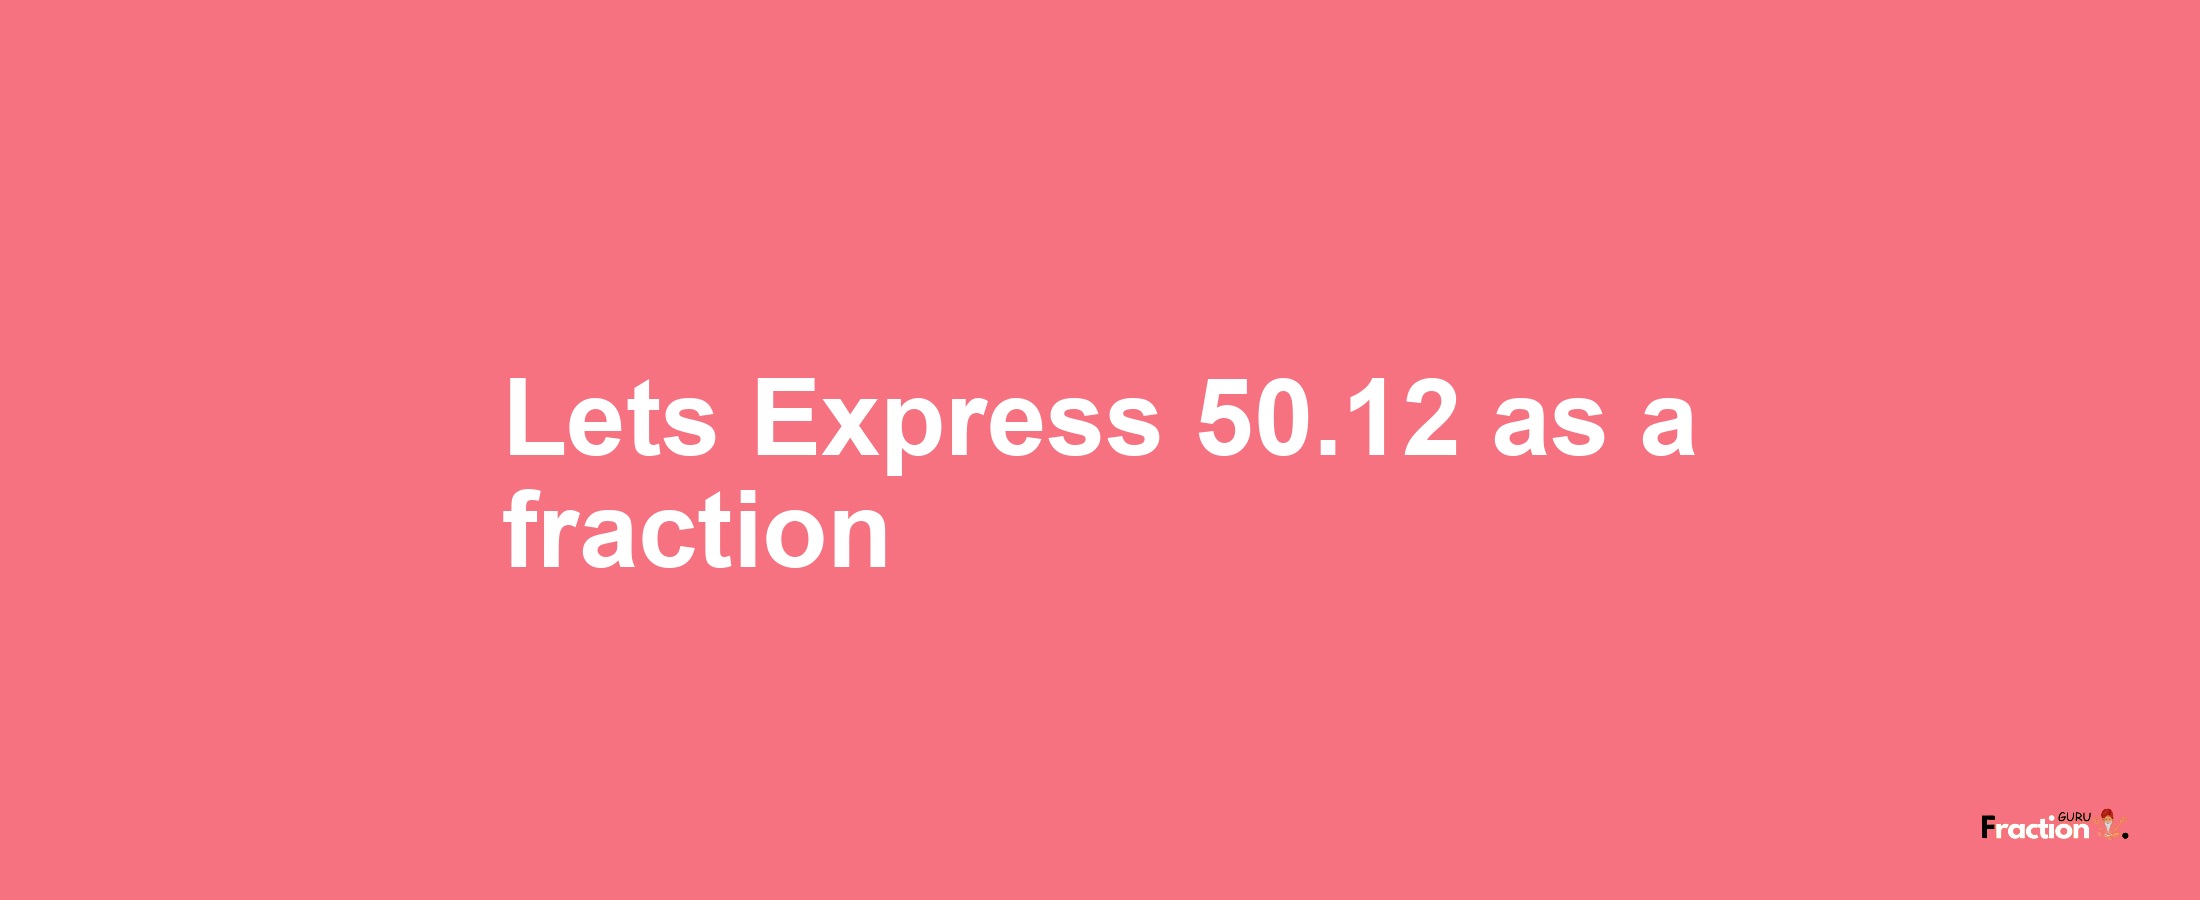 Lets Express 50.12 as afraction